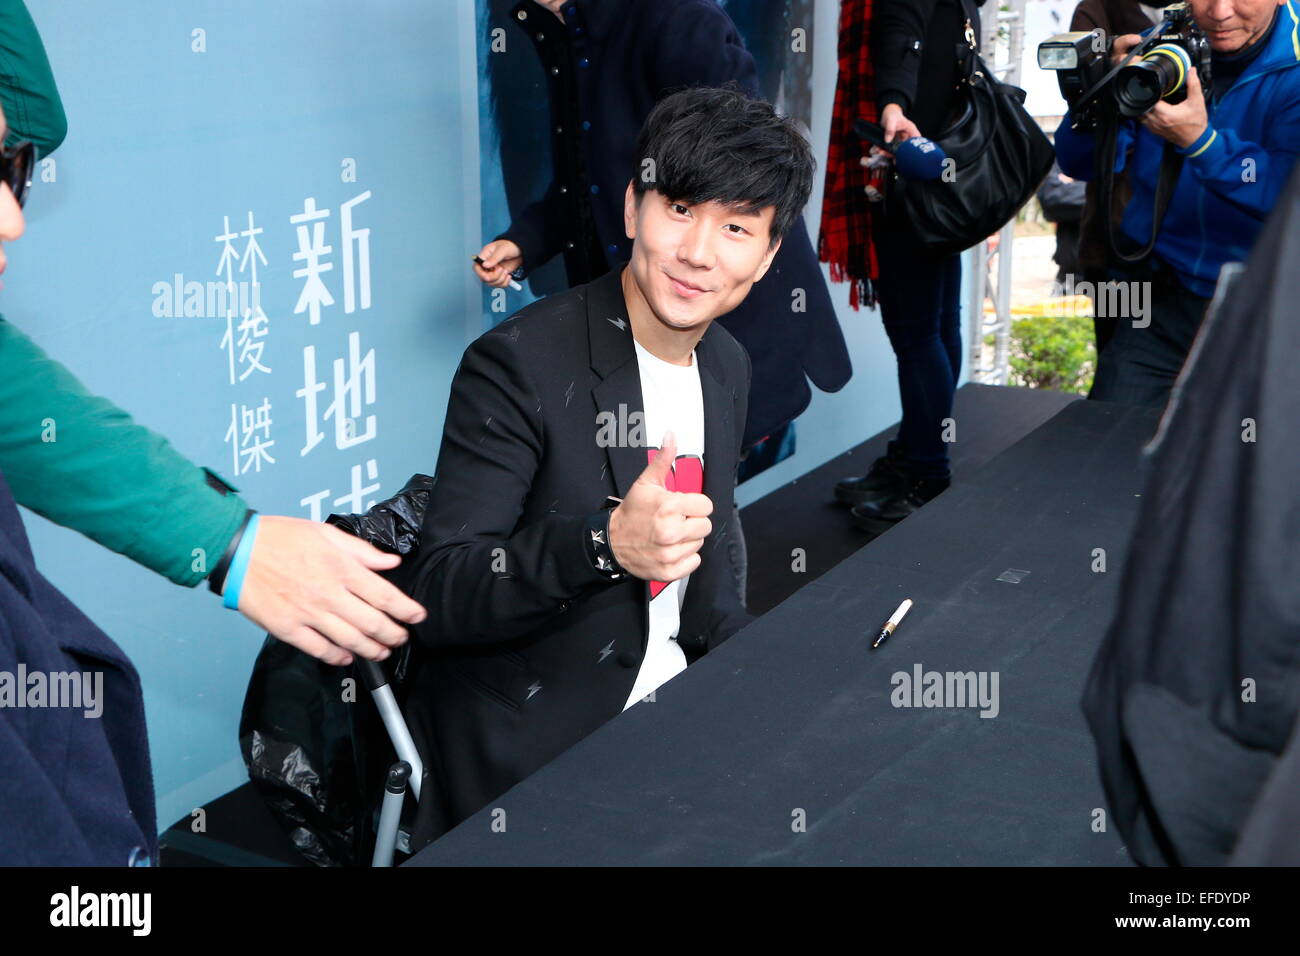 Lam JJ attends the sign conference to promote his new album in Taipei ...